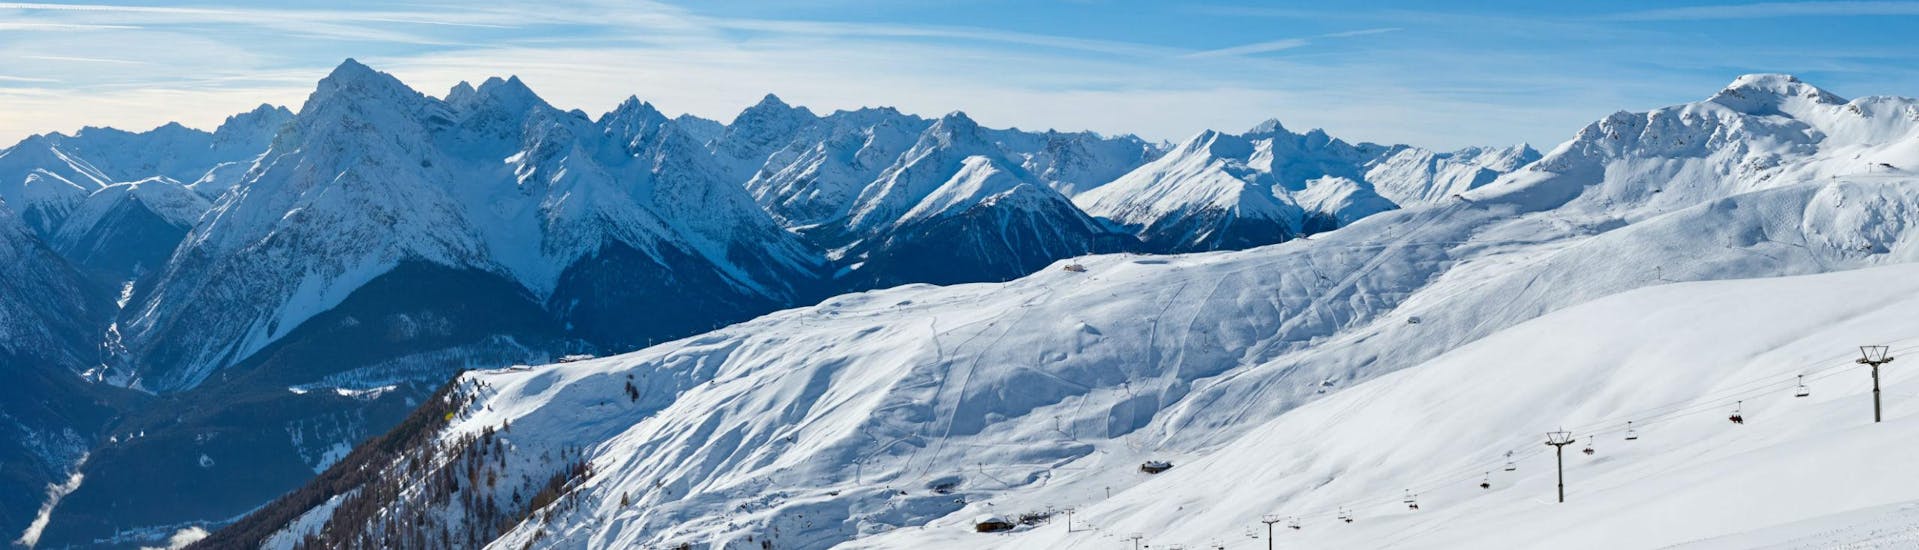 A panoramic view of one of the ski slopes in the Swiss ski resort of Scuol - Motta Naluns, where local ski schools offer a variety of ski lessons.